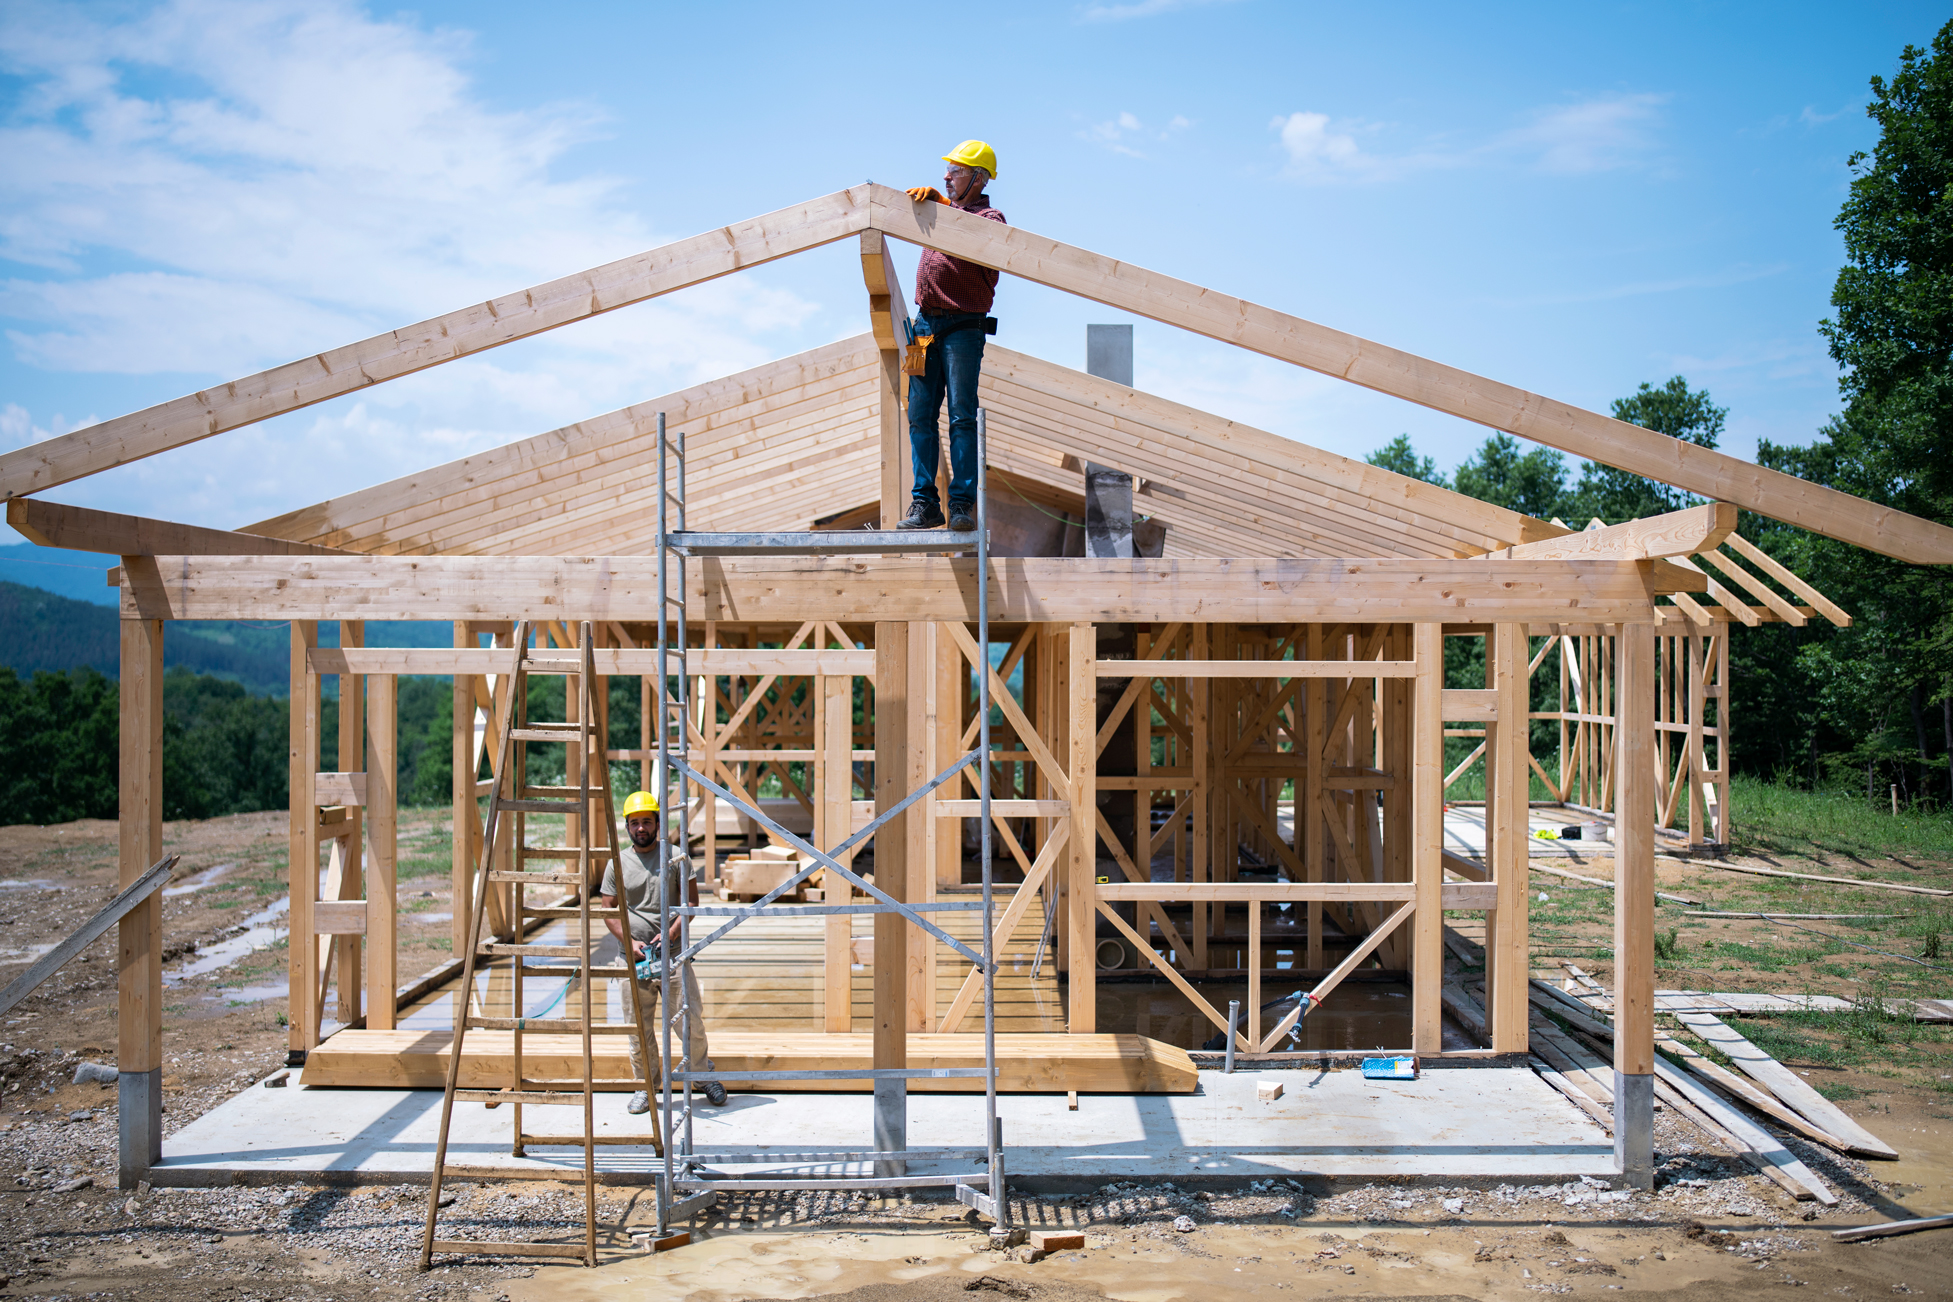 HERE'S HOW: How to handle building defects in new construction